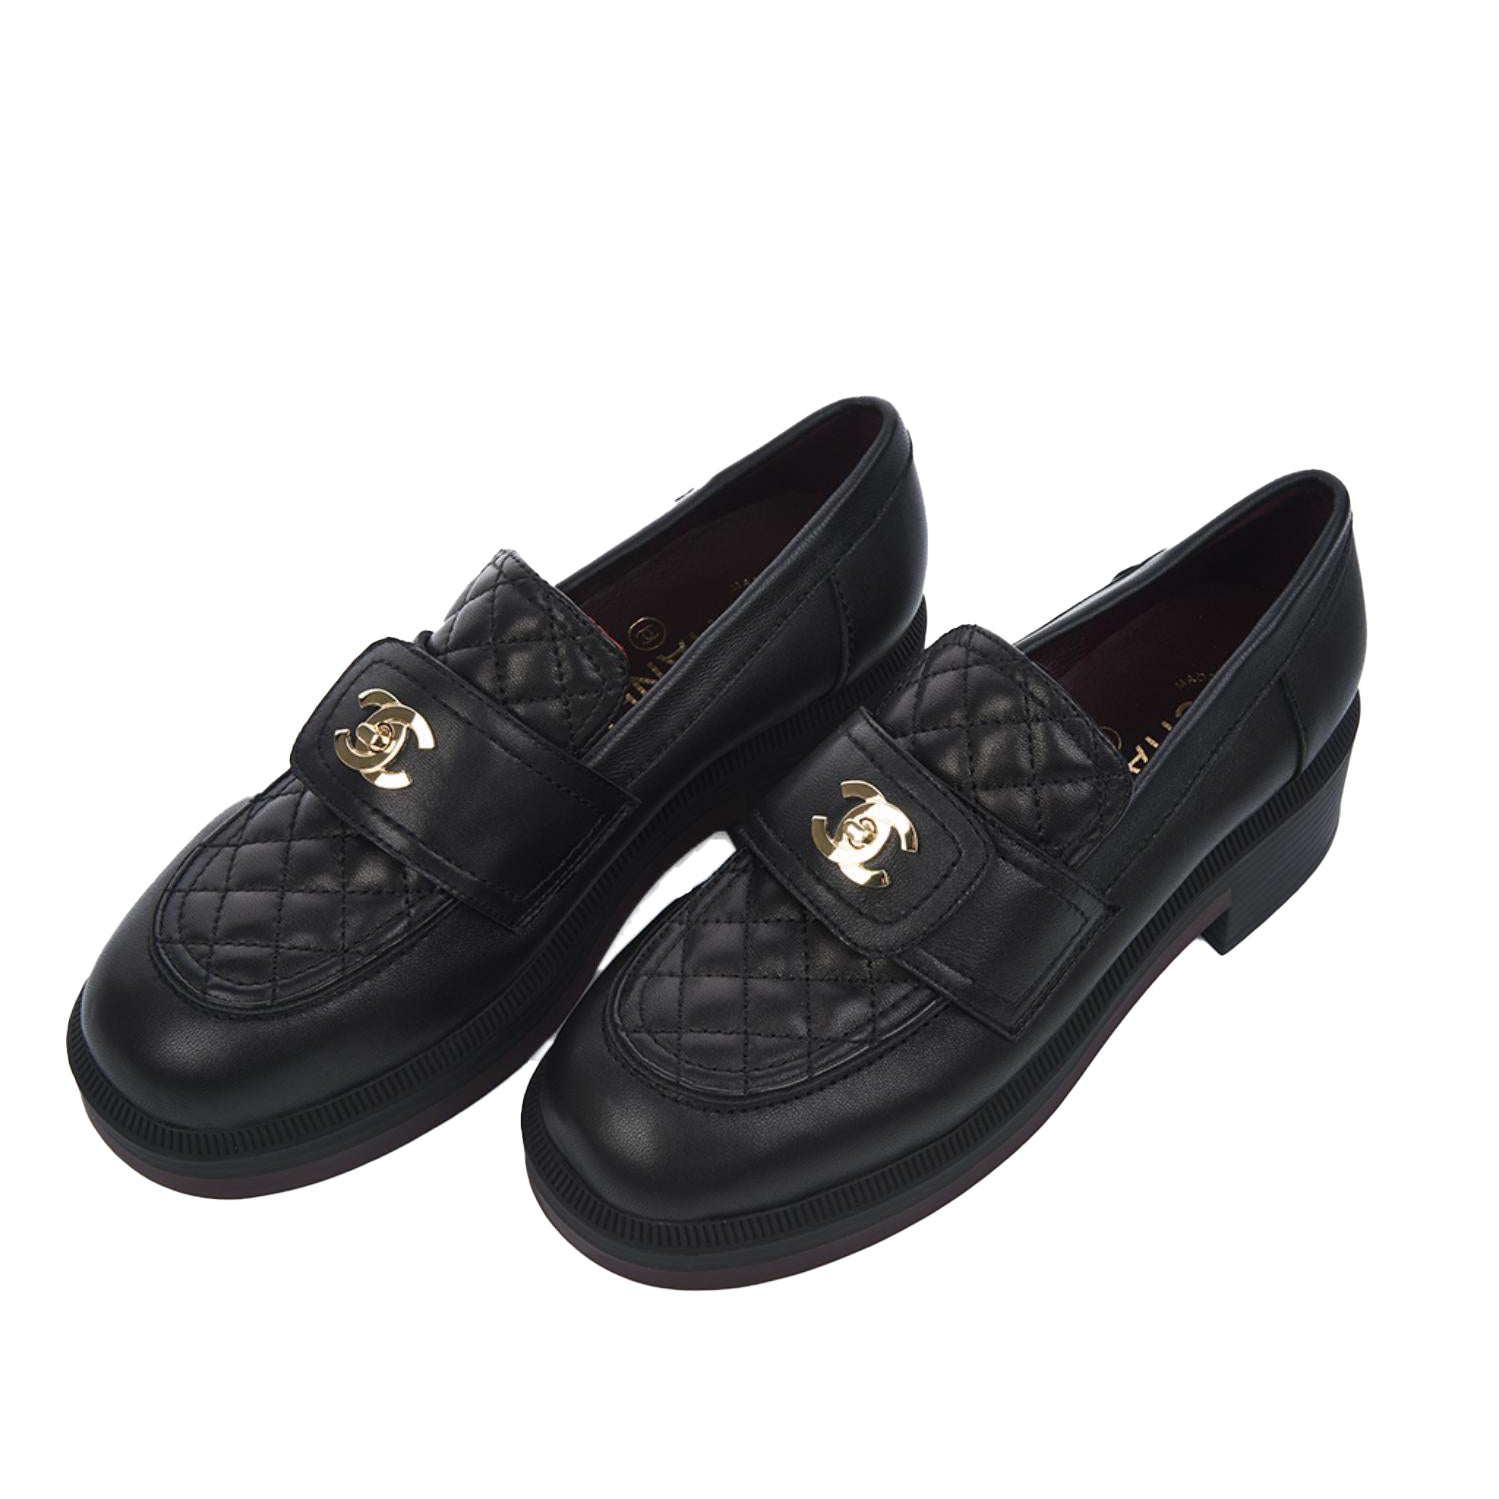 CHANEL Lambskin Quilted CC Turnlock Loafers 39.5 Black 1253682